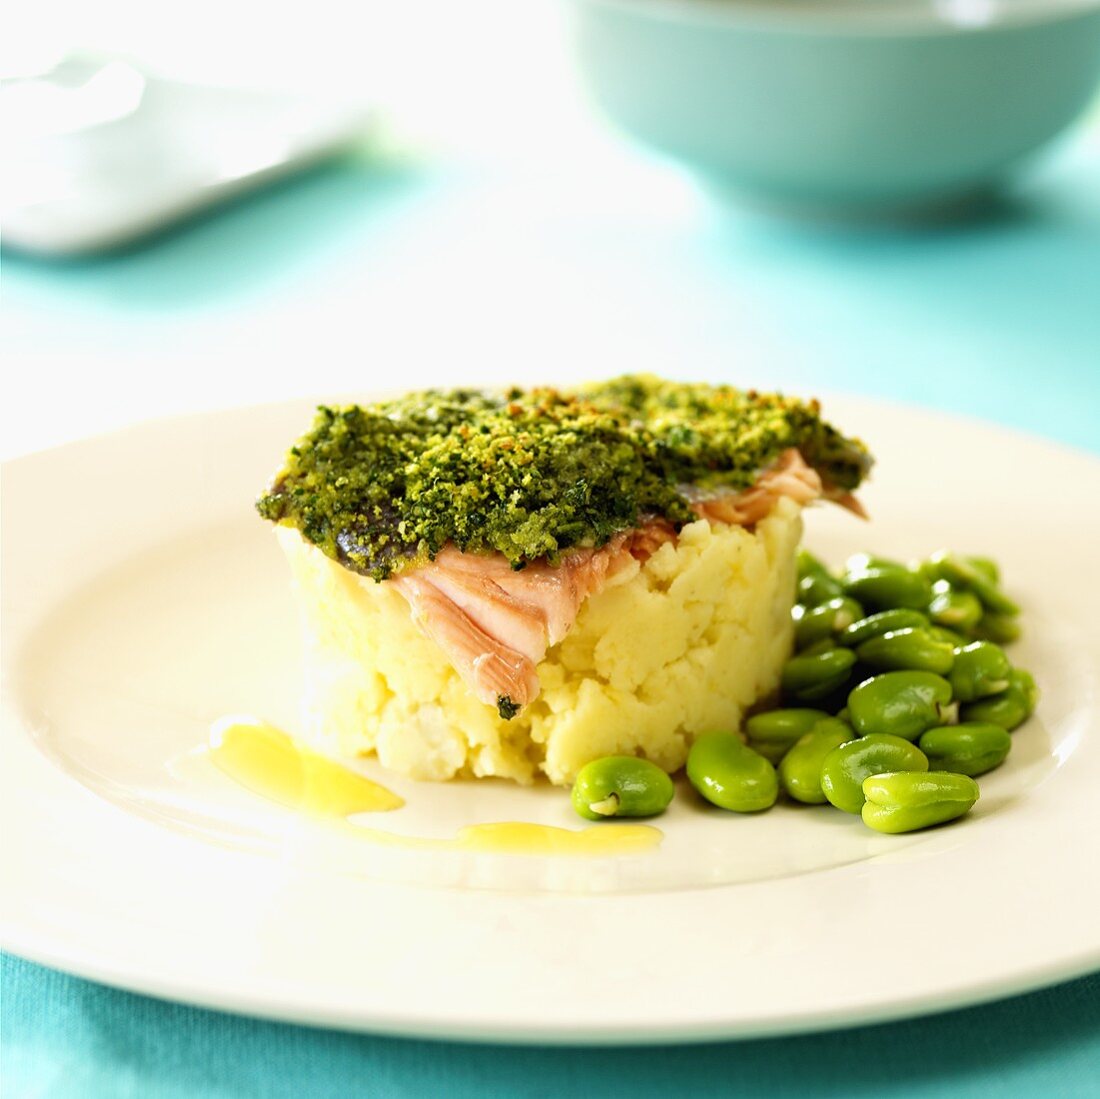 Salmon trout with herb crust on crushed potatoes